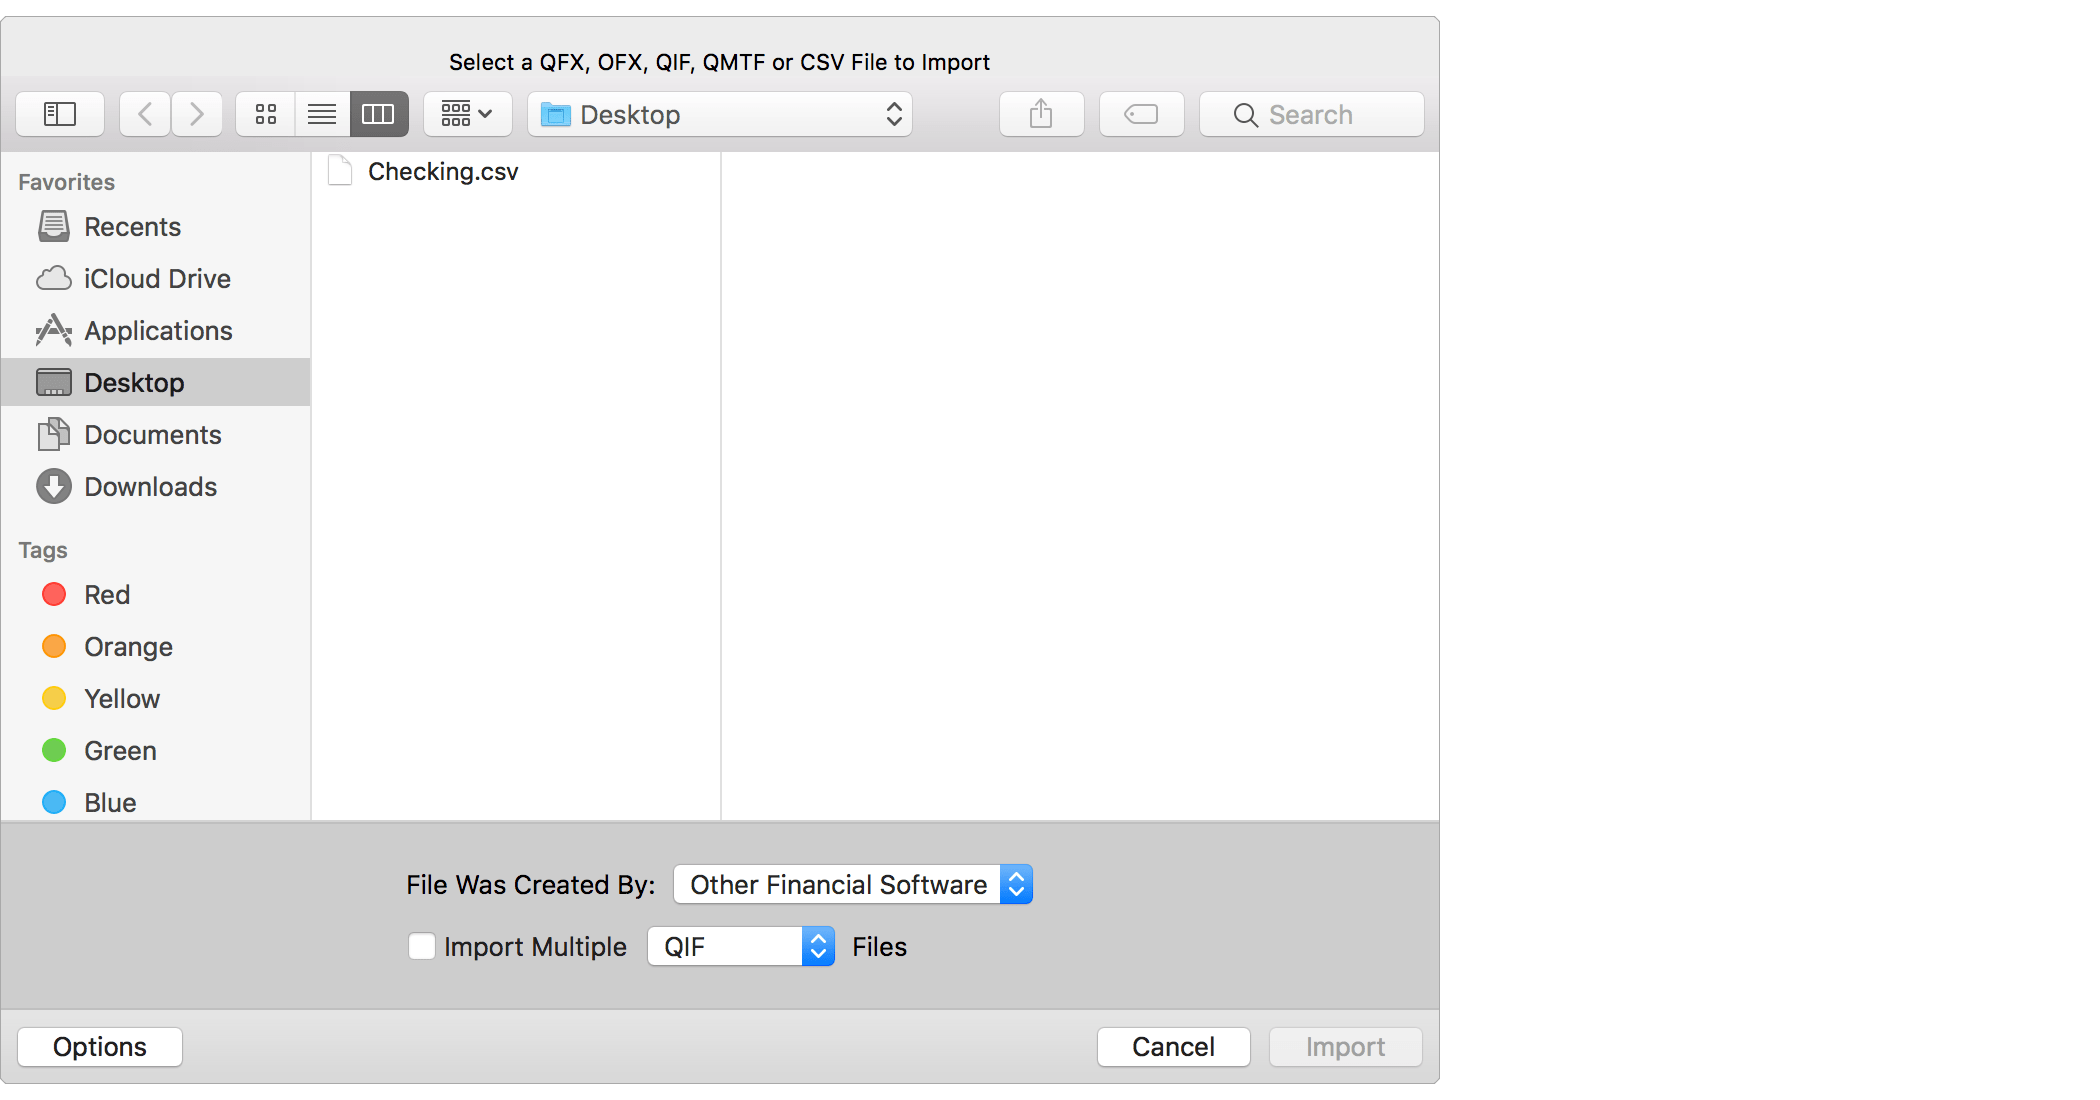 Select File to Import